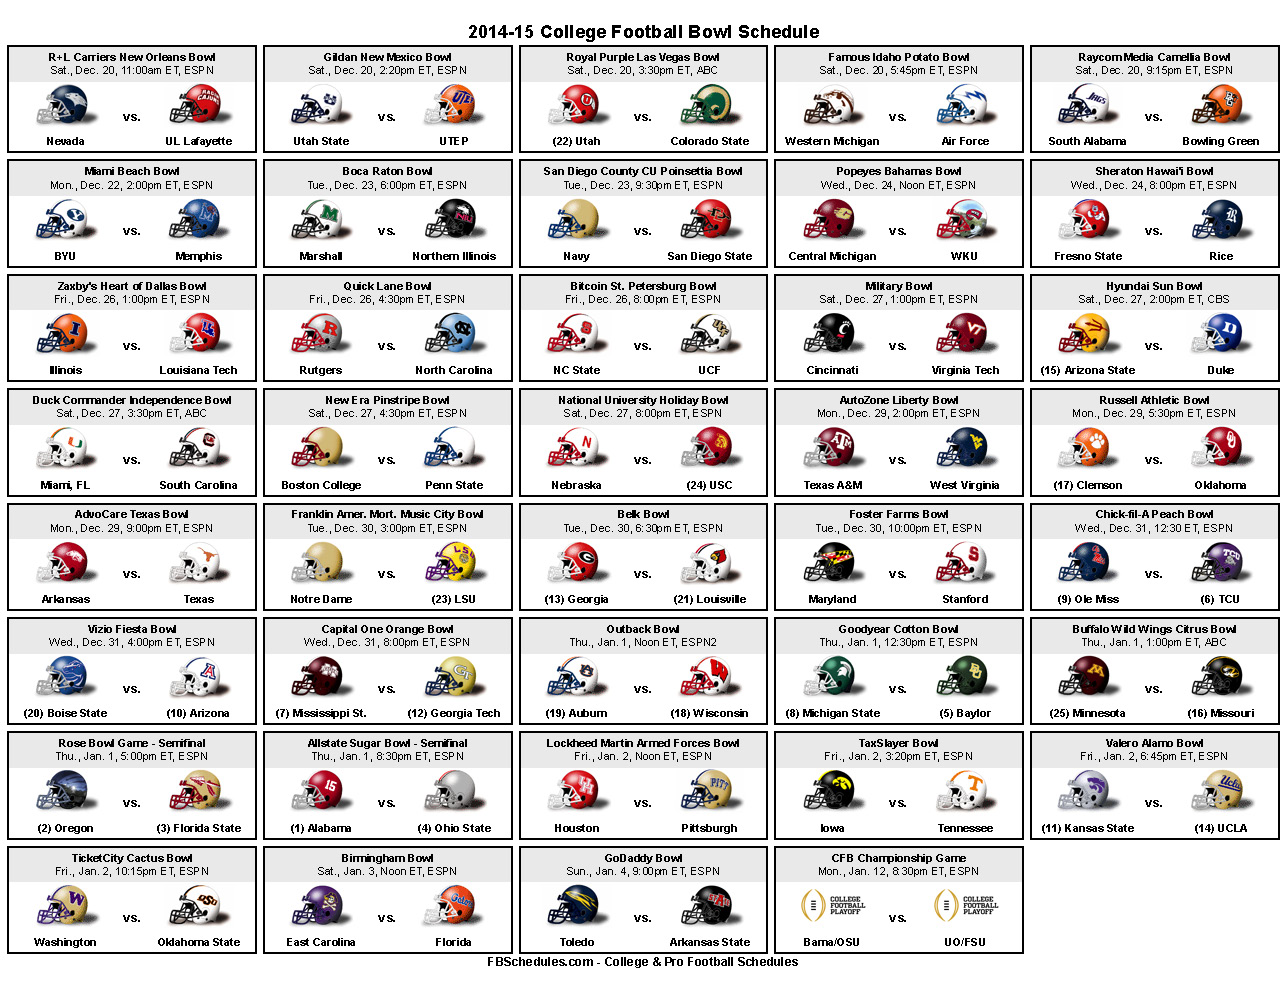 7-best-images-of-2015-bowl-schedule-printable-college-football-bowl